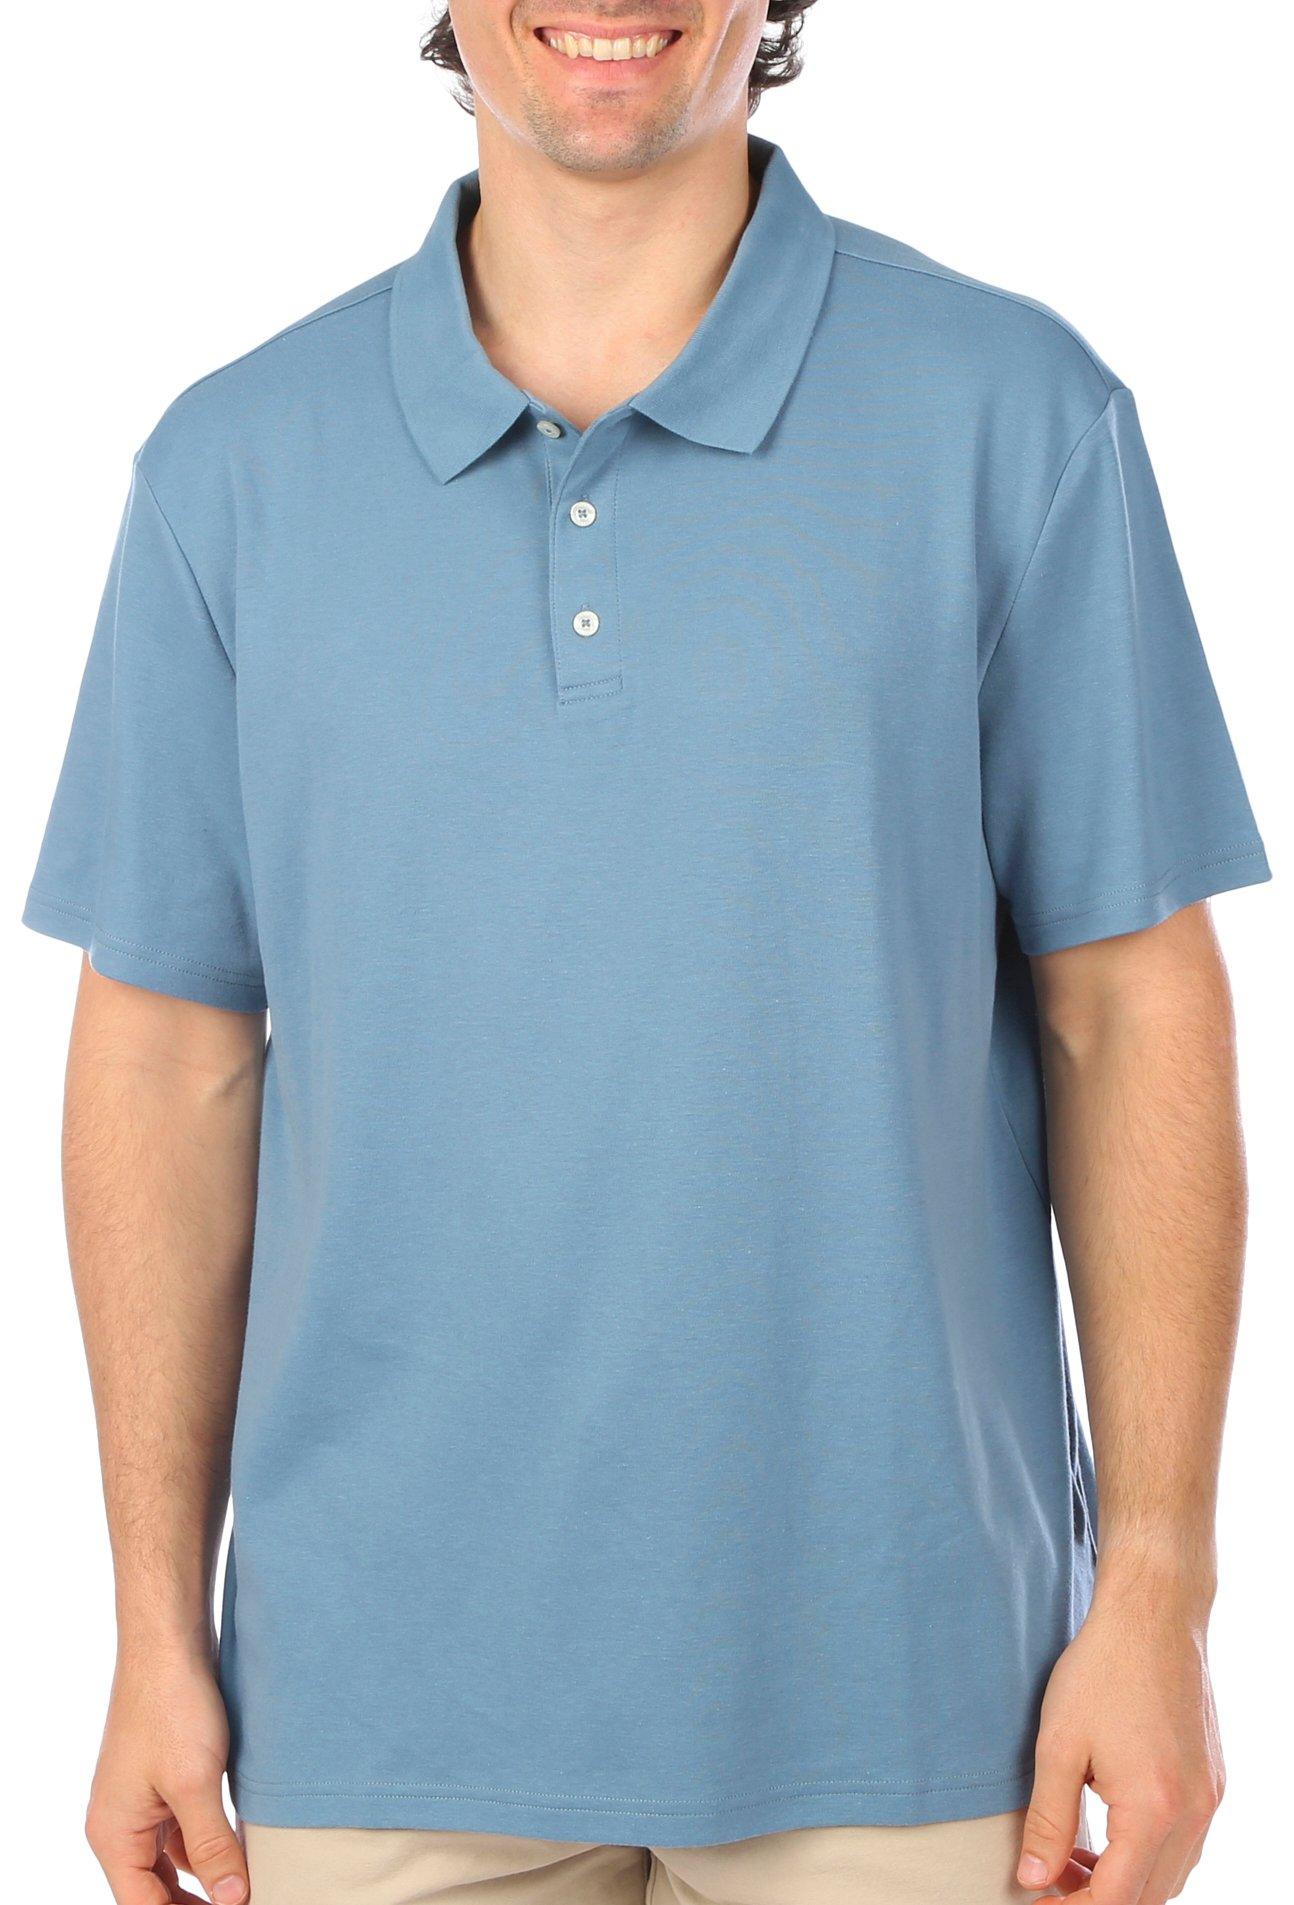 Tackle & Tides Mens Solid Short Sleeve Polo